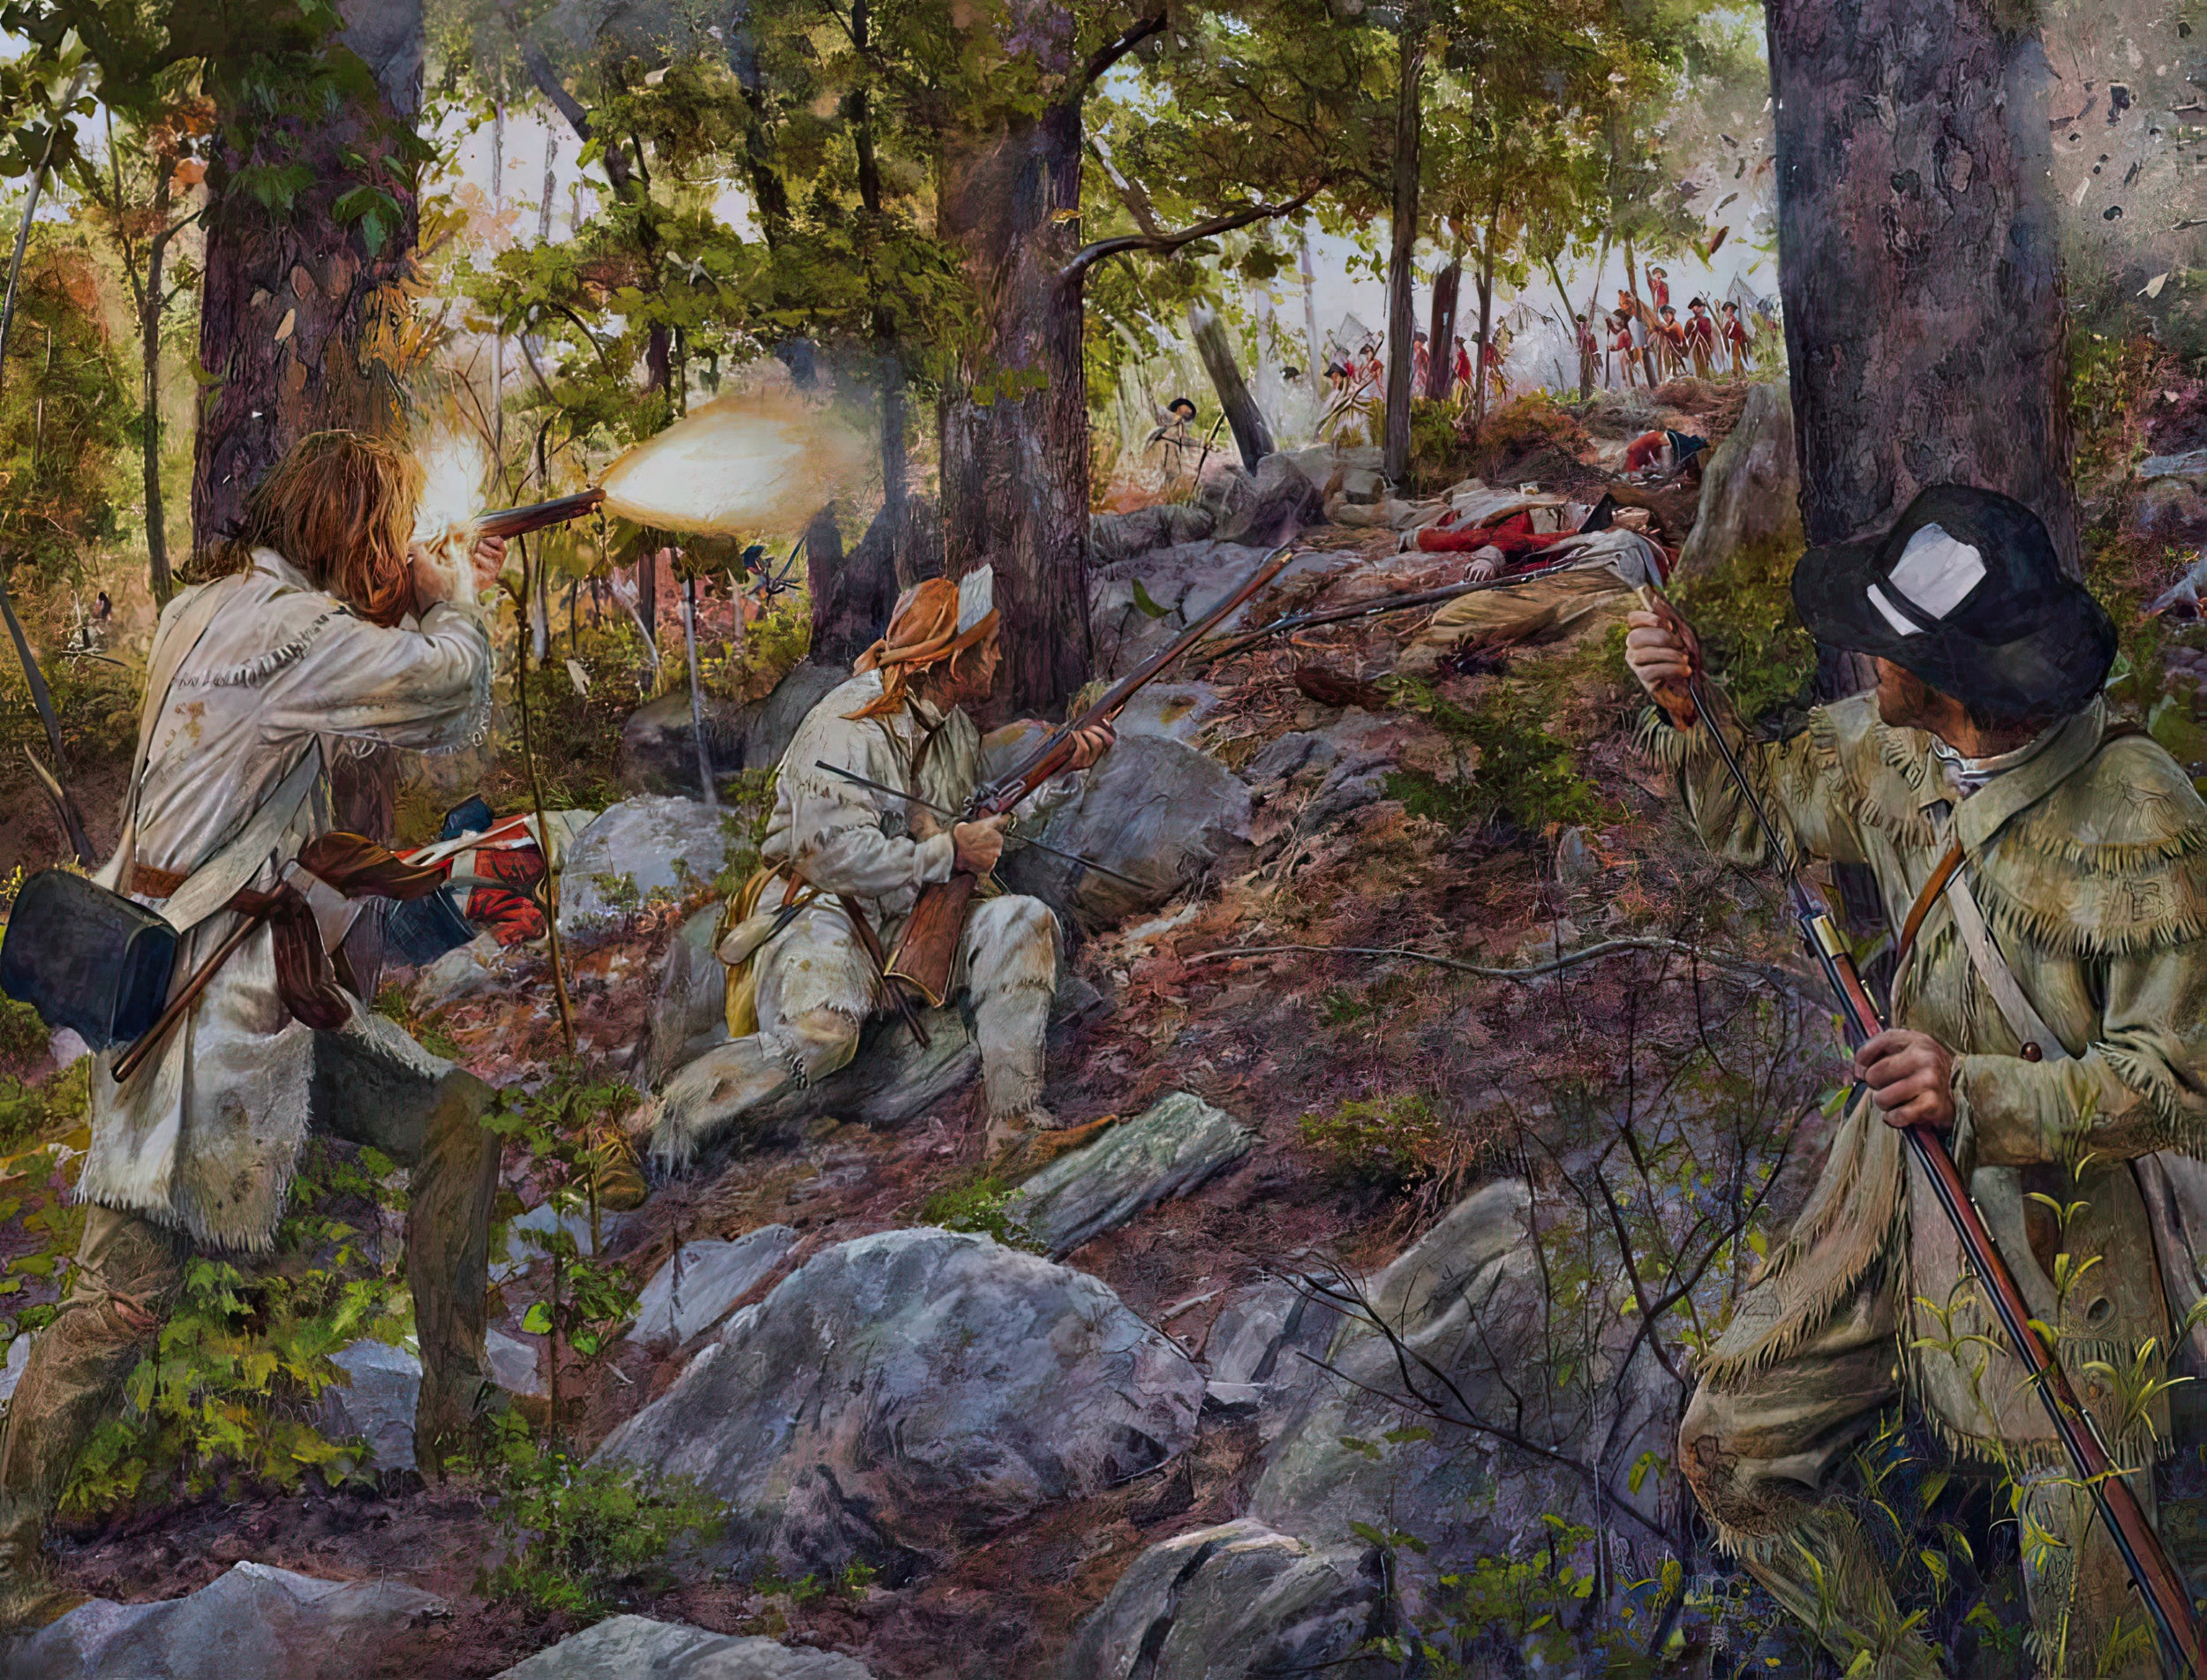 The Battle of King's Mountain - Painting depicting the American Revolutionary War battle